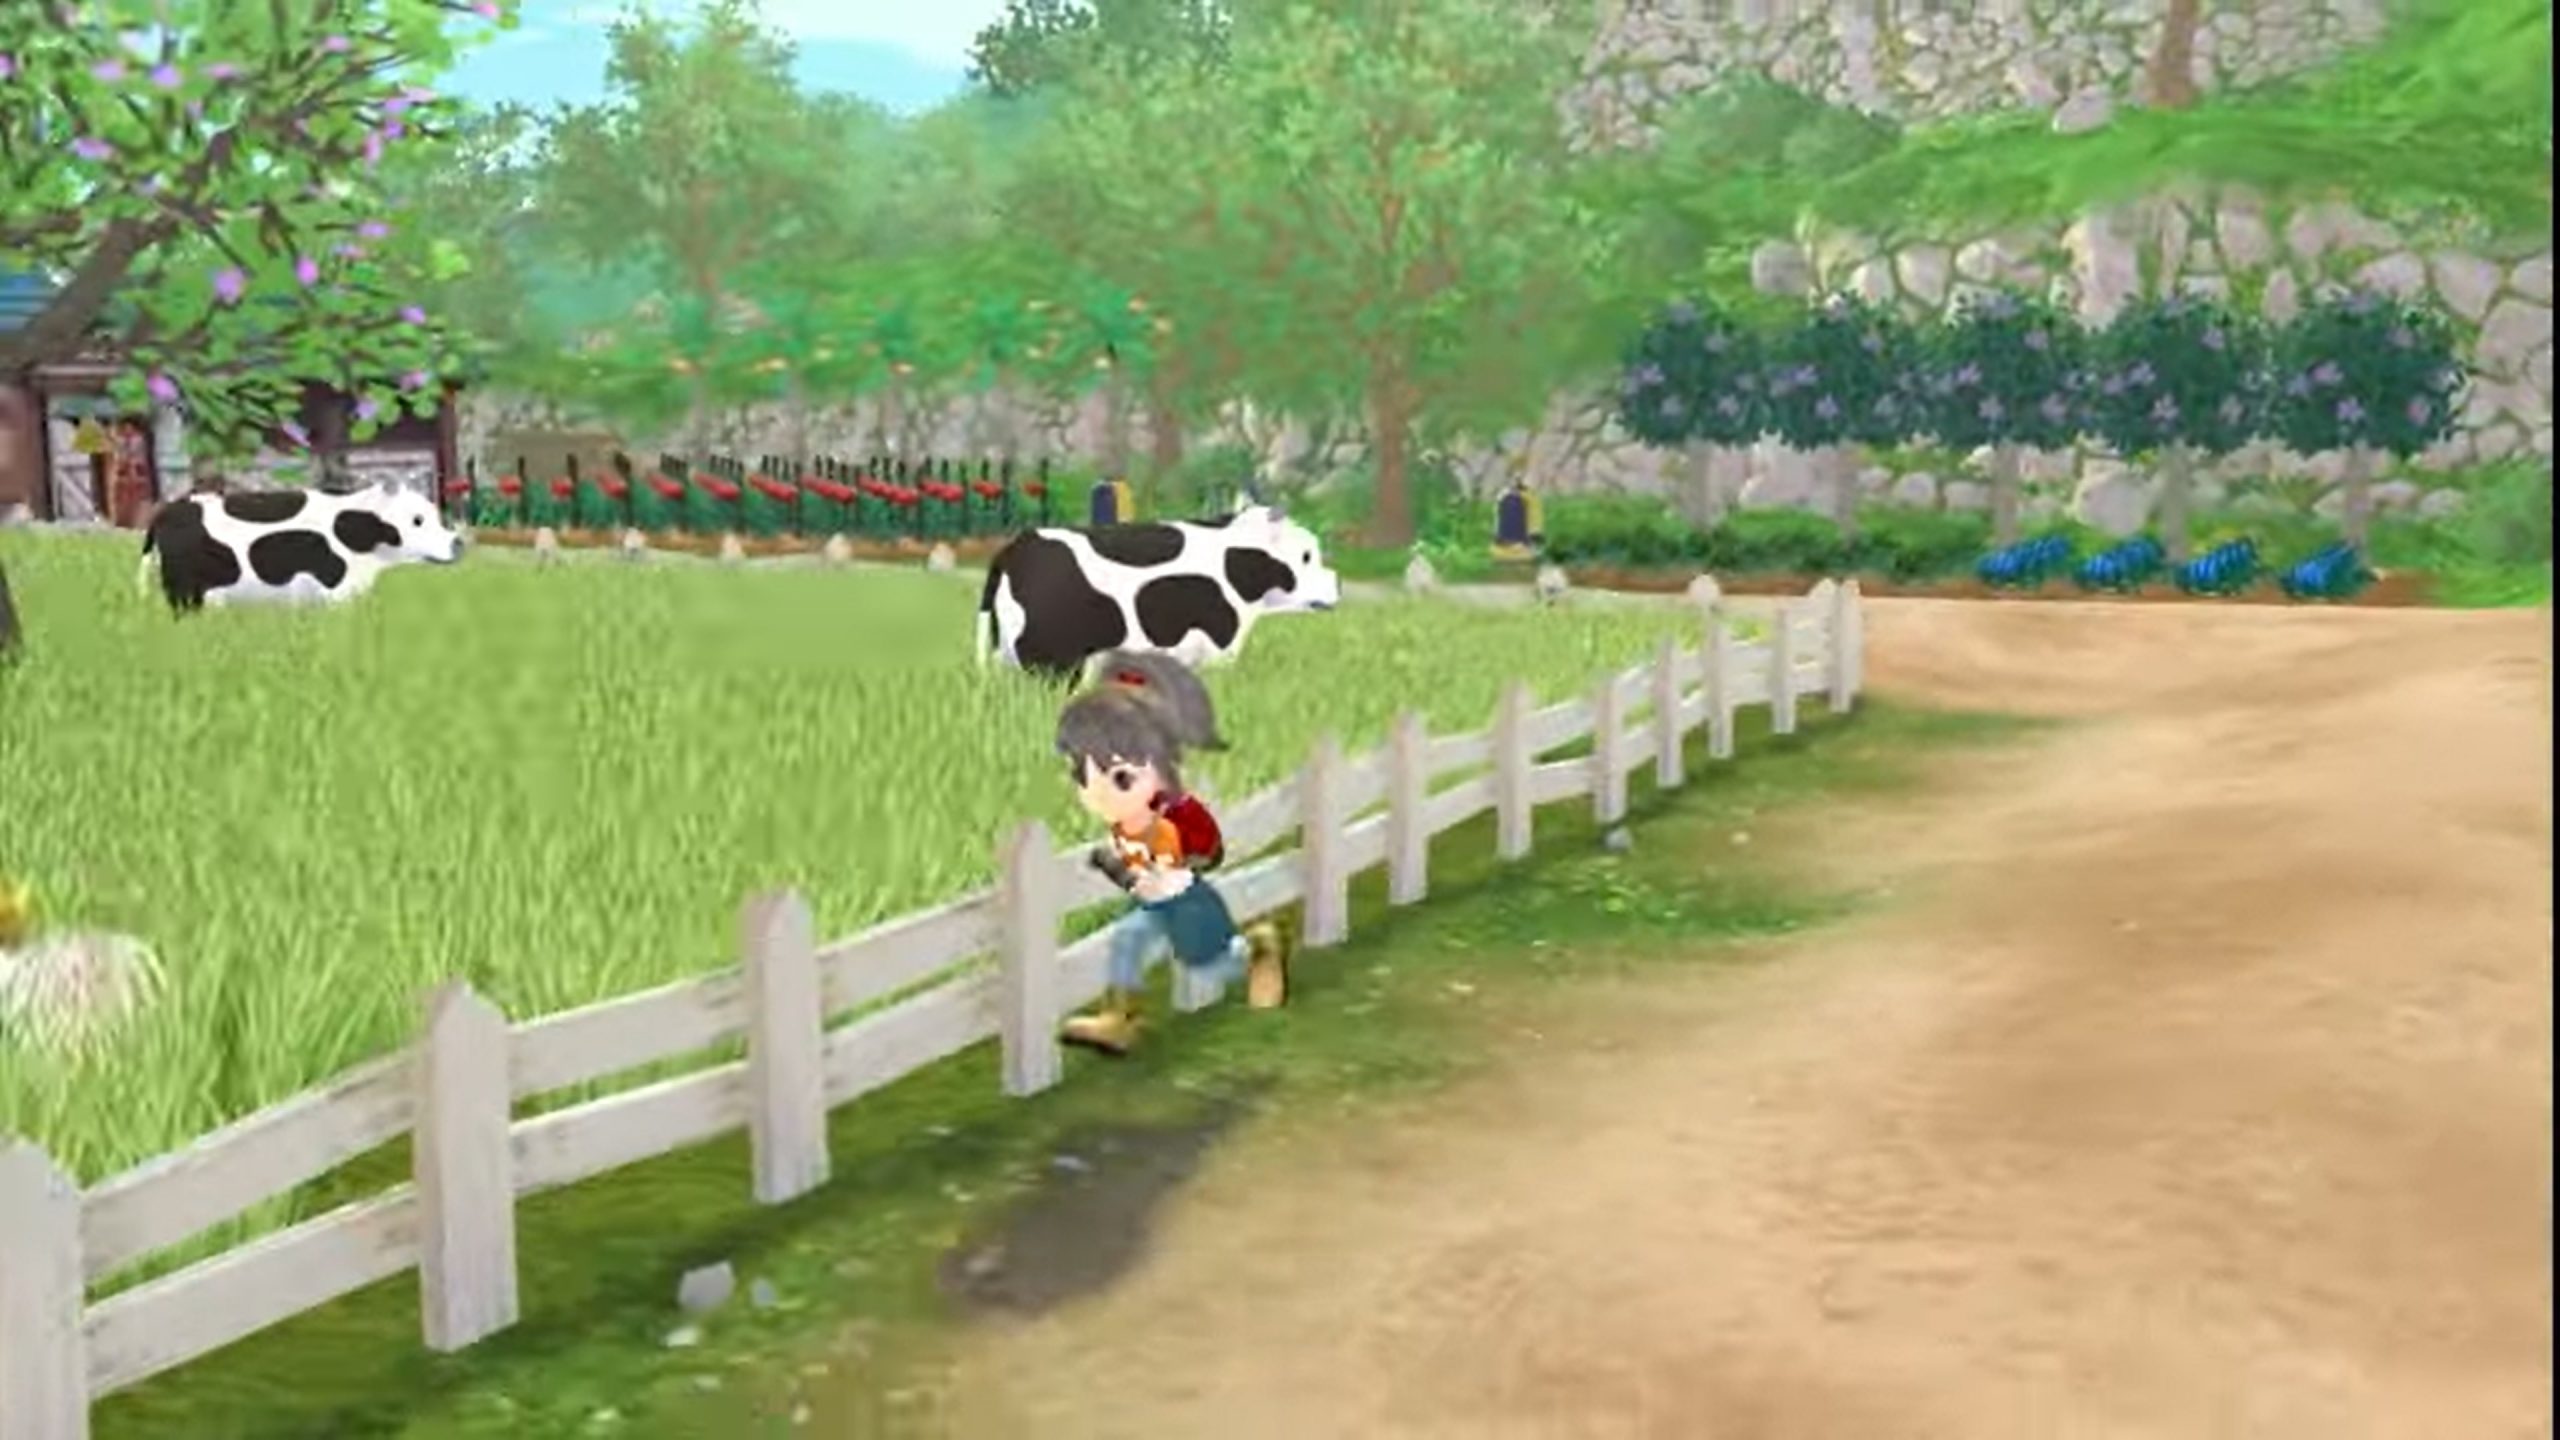 Story of Seasons A Wonderful Life announced for Switch